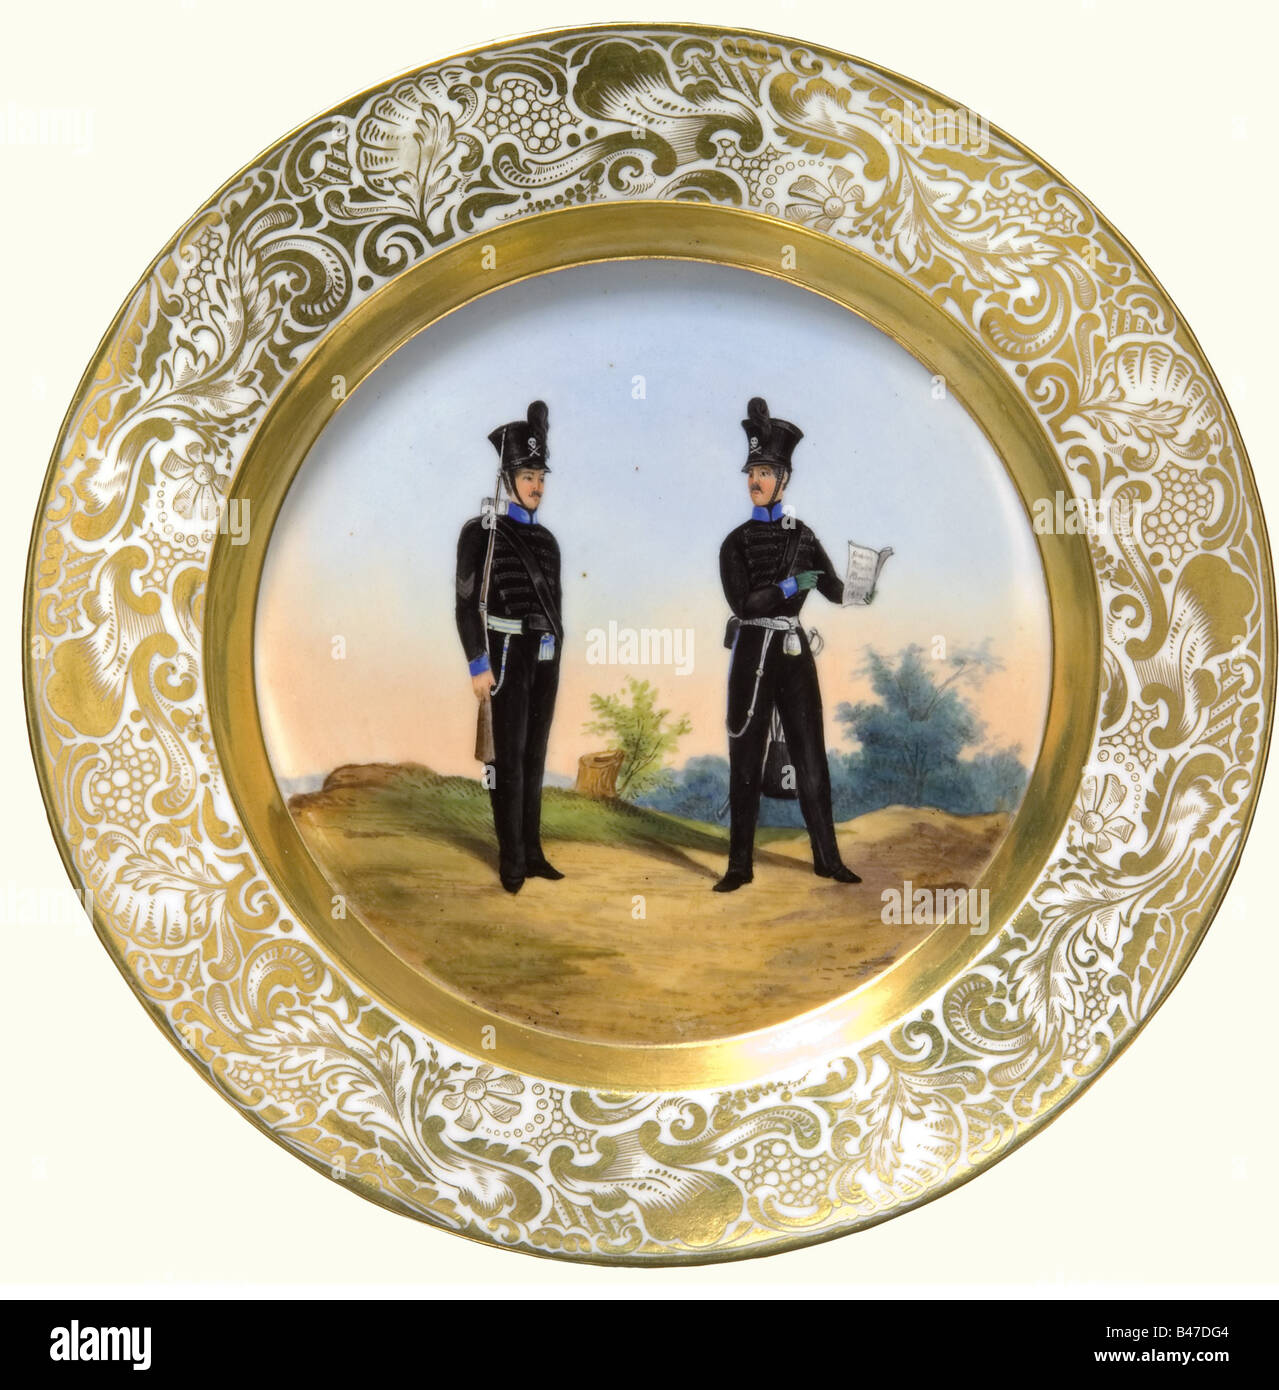 The Ducal Brunswick Porcelain Manufacture., A plate showing two soldiers of the Ducal Brunswick Life Guard Infantry Battalion. Porcelain with a glazed painting in the centre of an officer and an NCO of the Life Guard Battalion in black uniform. A landscape in the background. The transition to the border is gilded, and there is lavish gold floral decoration running around the rim. A manufacturer's mark in underglaze blue from 1820 to 1860 and '3' are on the bottom. Diameter 24.5 cm. fine arts, people, 19th century, Braunschweig, Brunswick, German, Germ, Artist's Copyright has not to be cleared Stock Photo